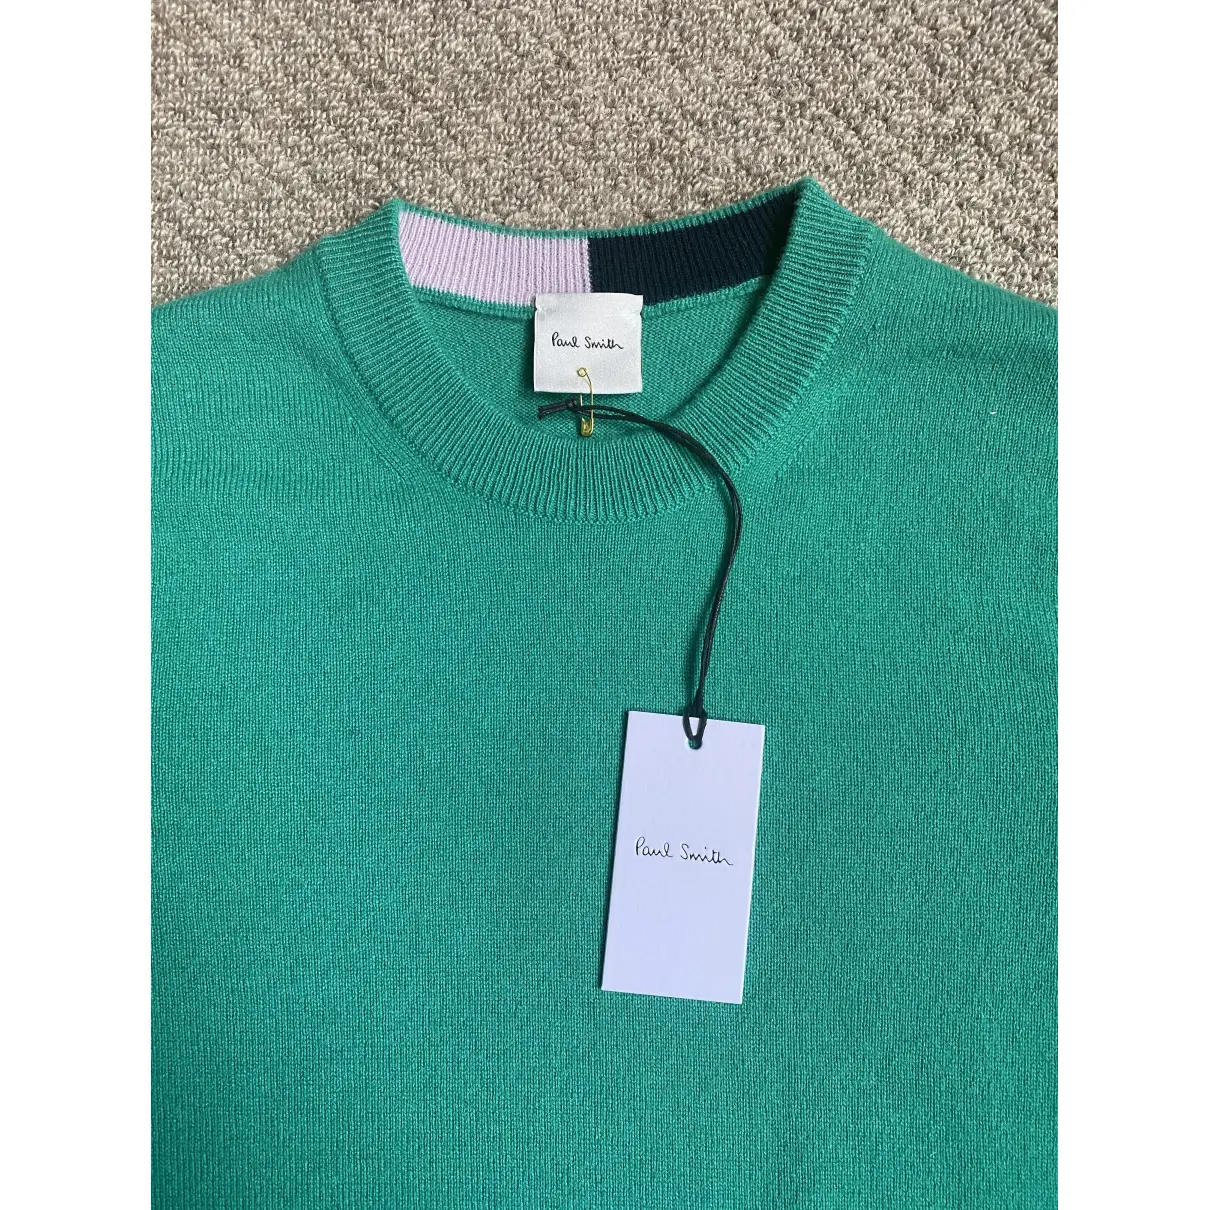 Buy Paul Smith Cashmere jumper online